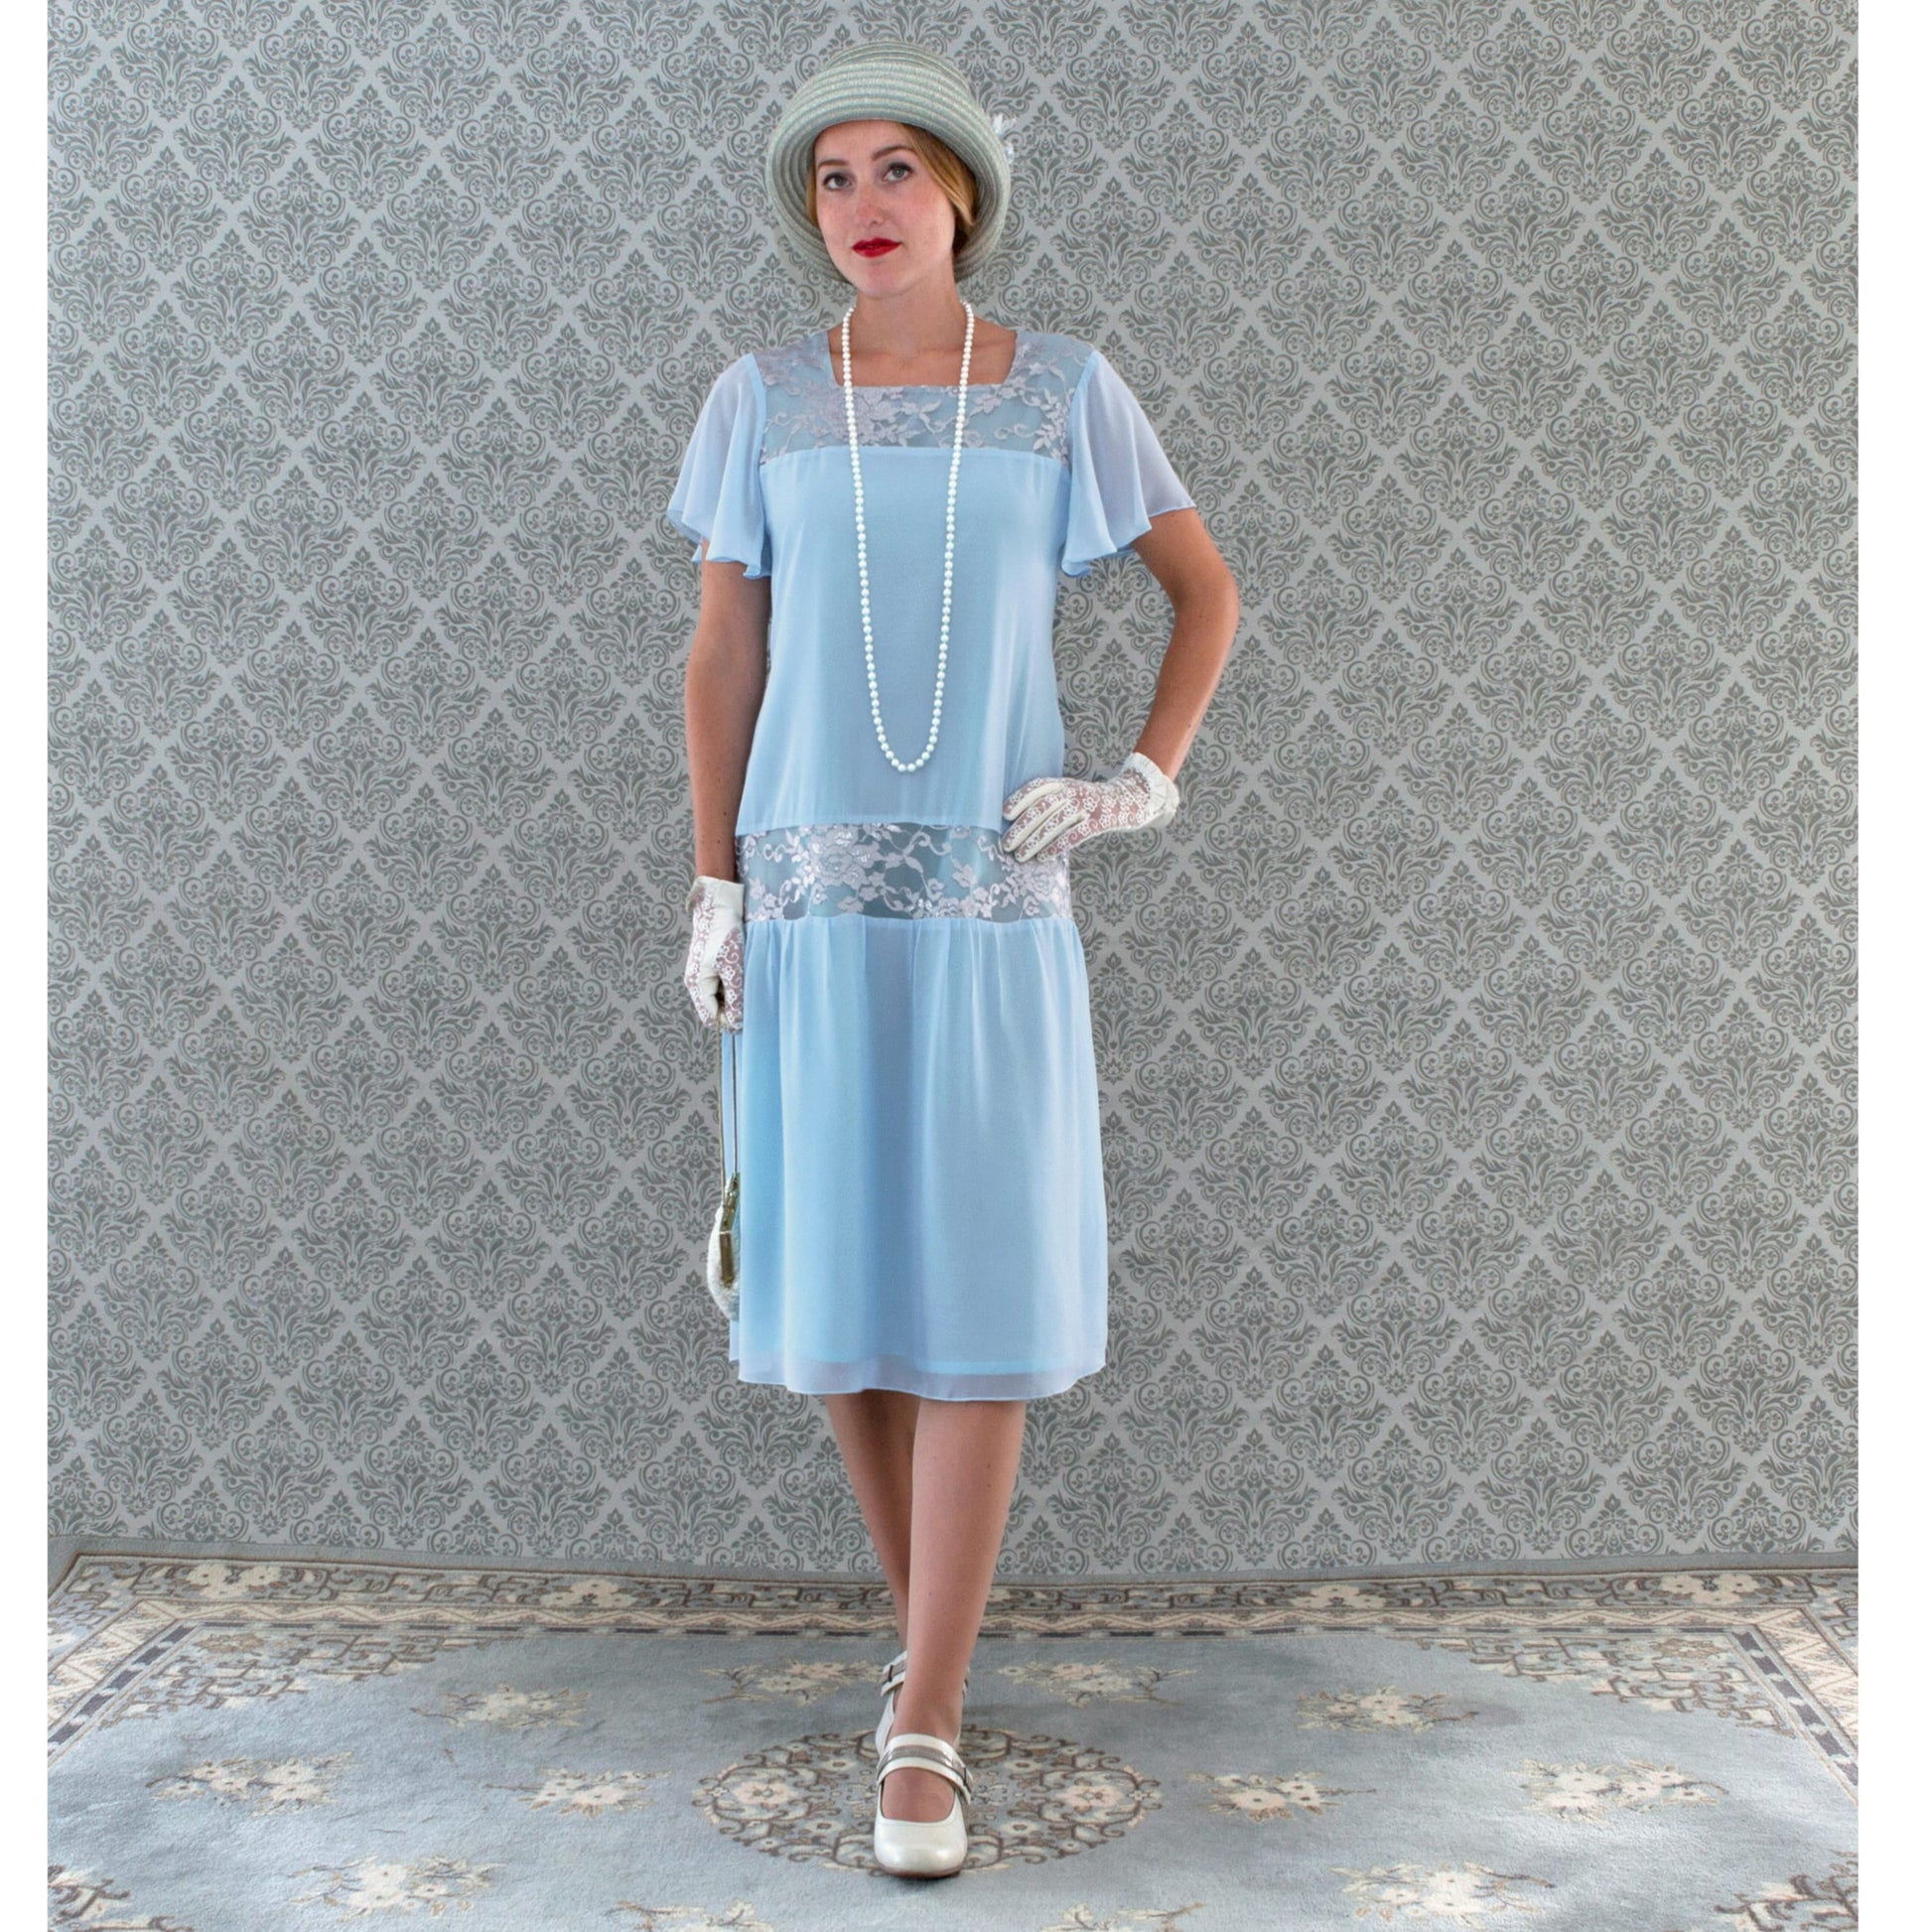 Great Gatsby day dress inspired by 1920s fashion made of light blue chiffon and silver grey lace fabrics and with flutter sleeves. 